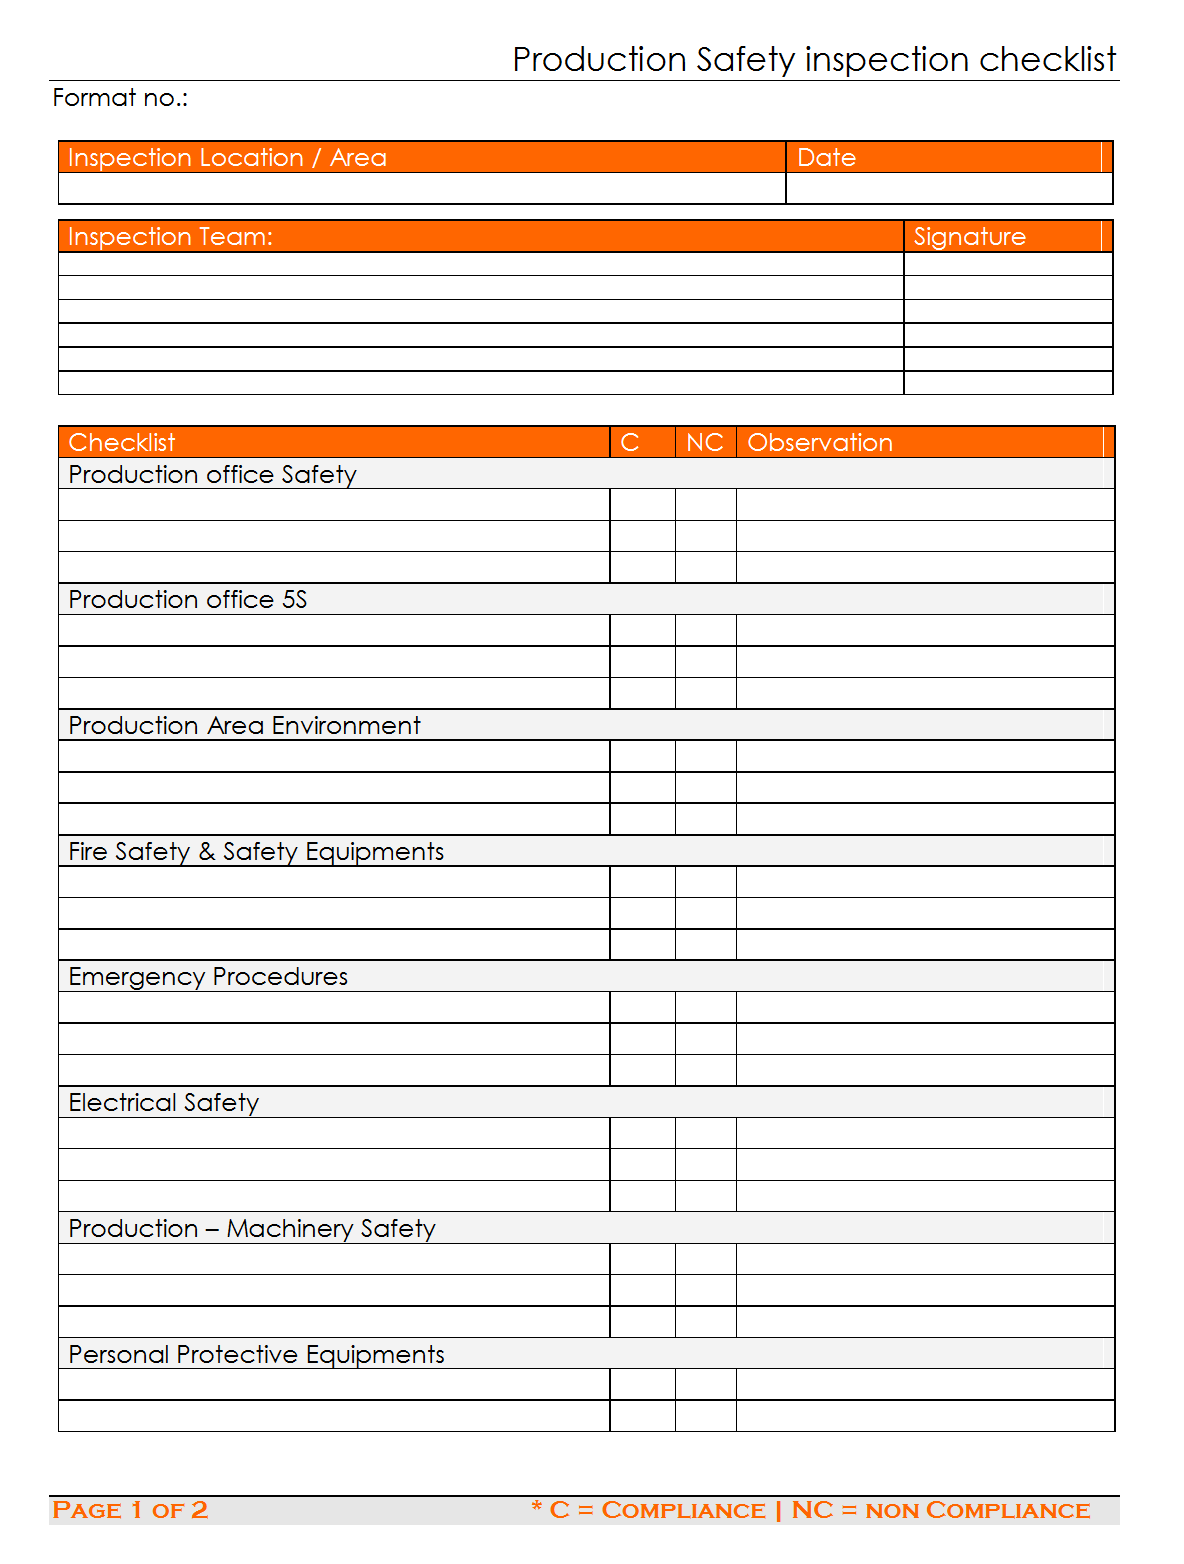 Production safety inspection checklist template Within Food Safety Inspection Checklist Template Pertaining To Food Safety Inspection Checklist Template